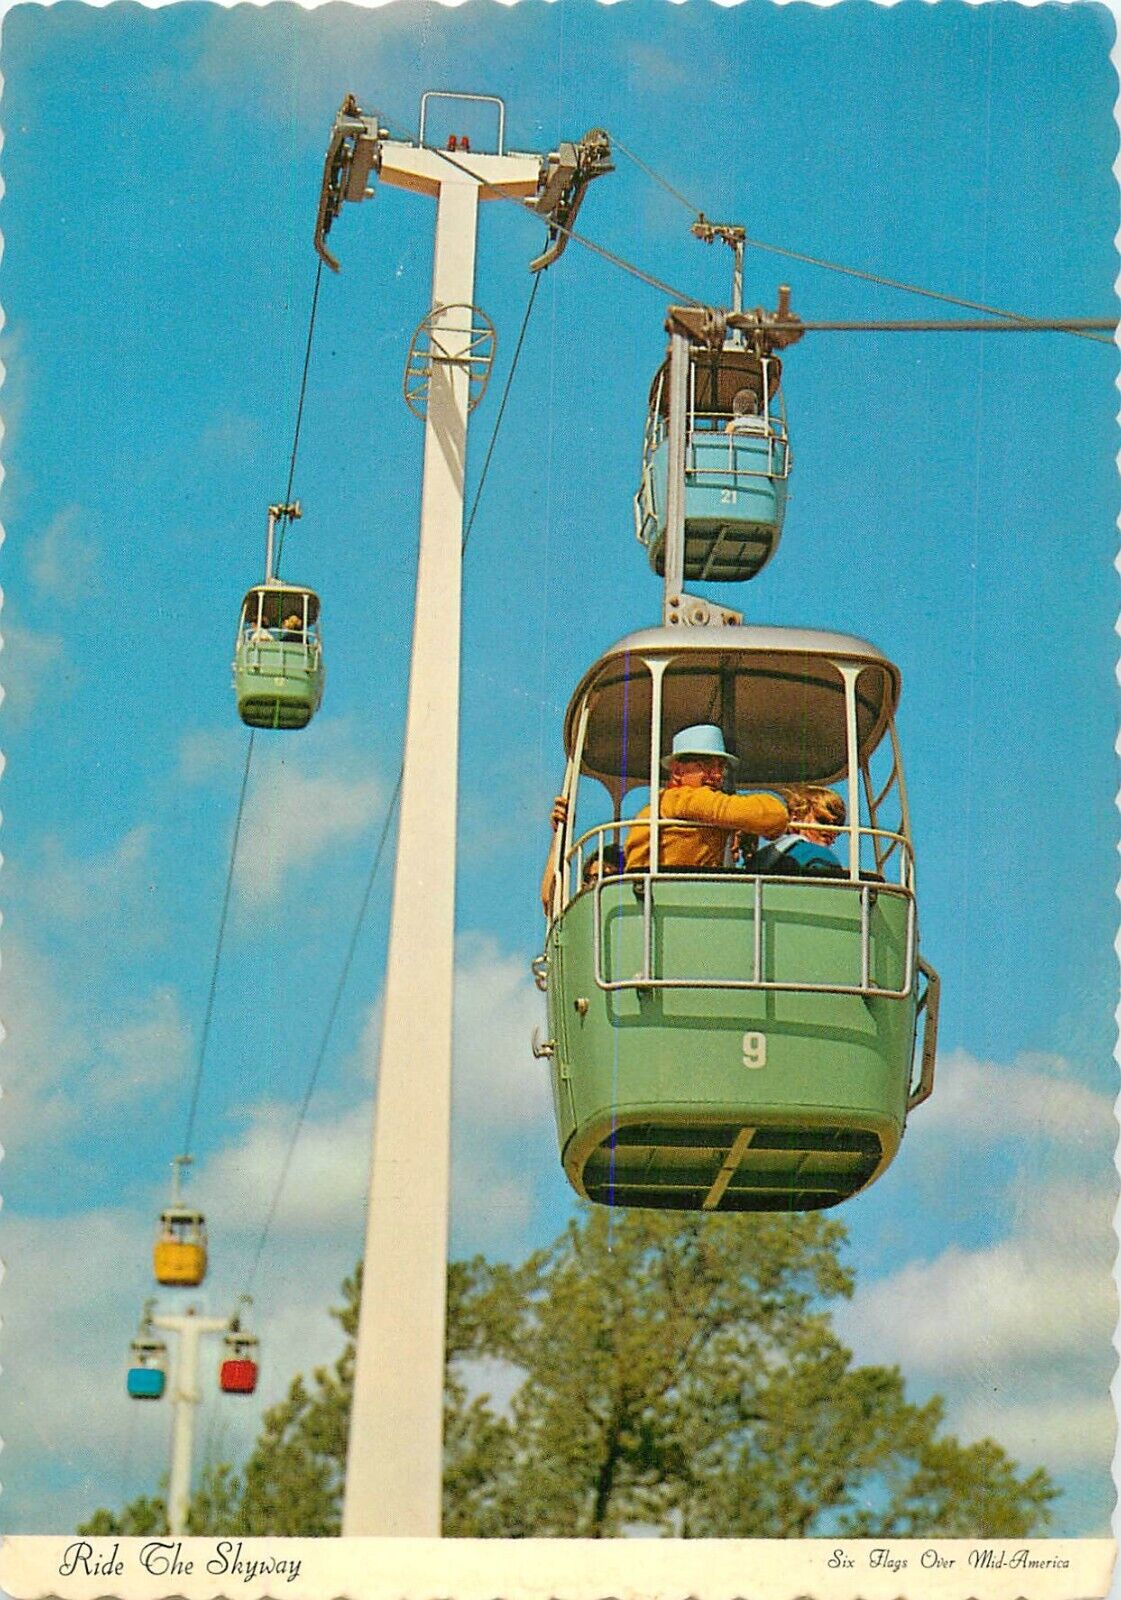 c1970s Six Flags Over Mid America -St Louis, Skyway Ride Postcard